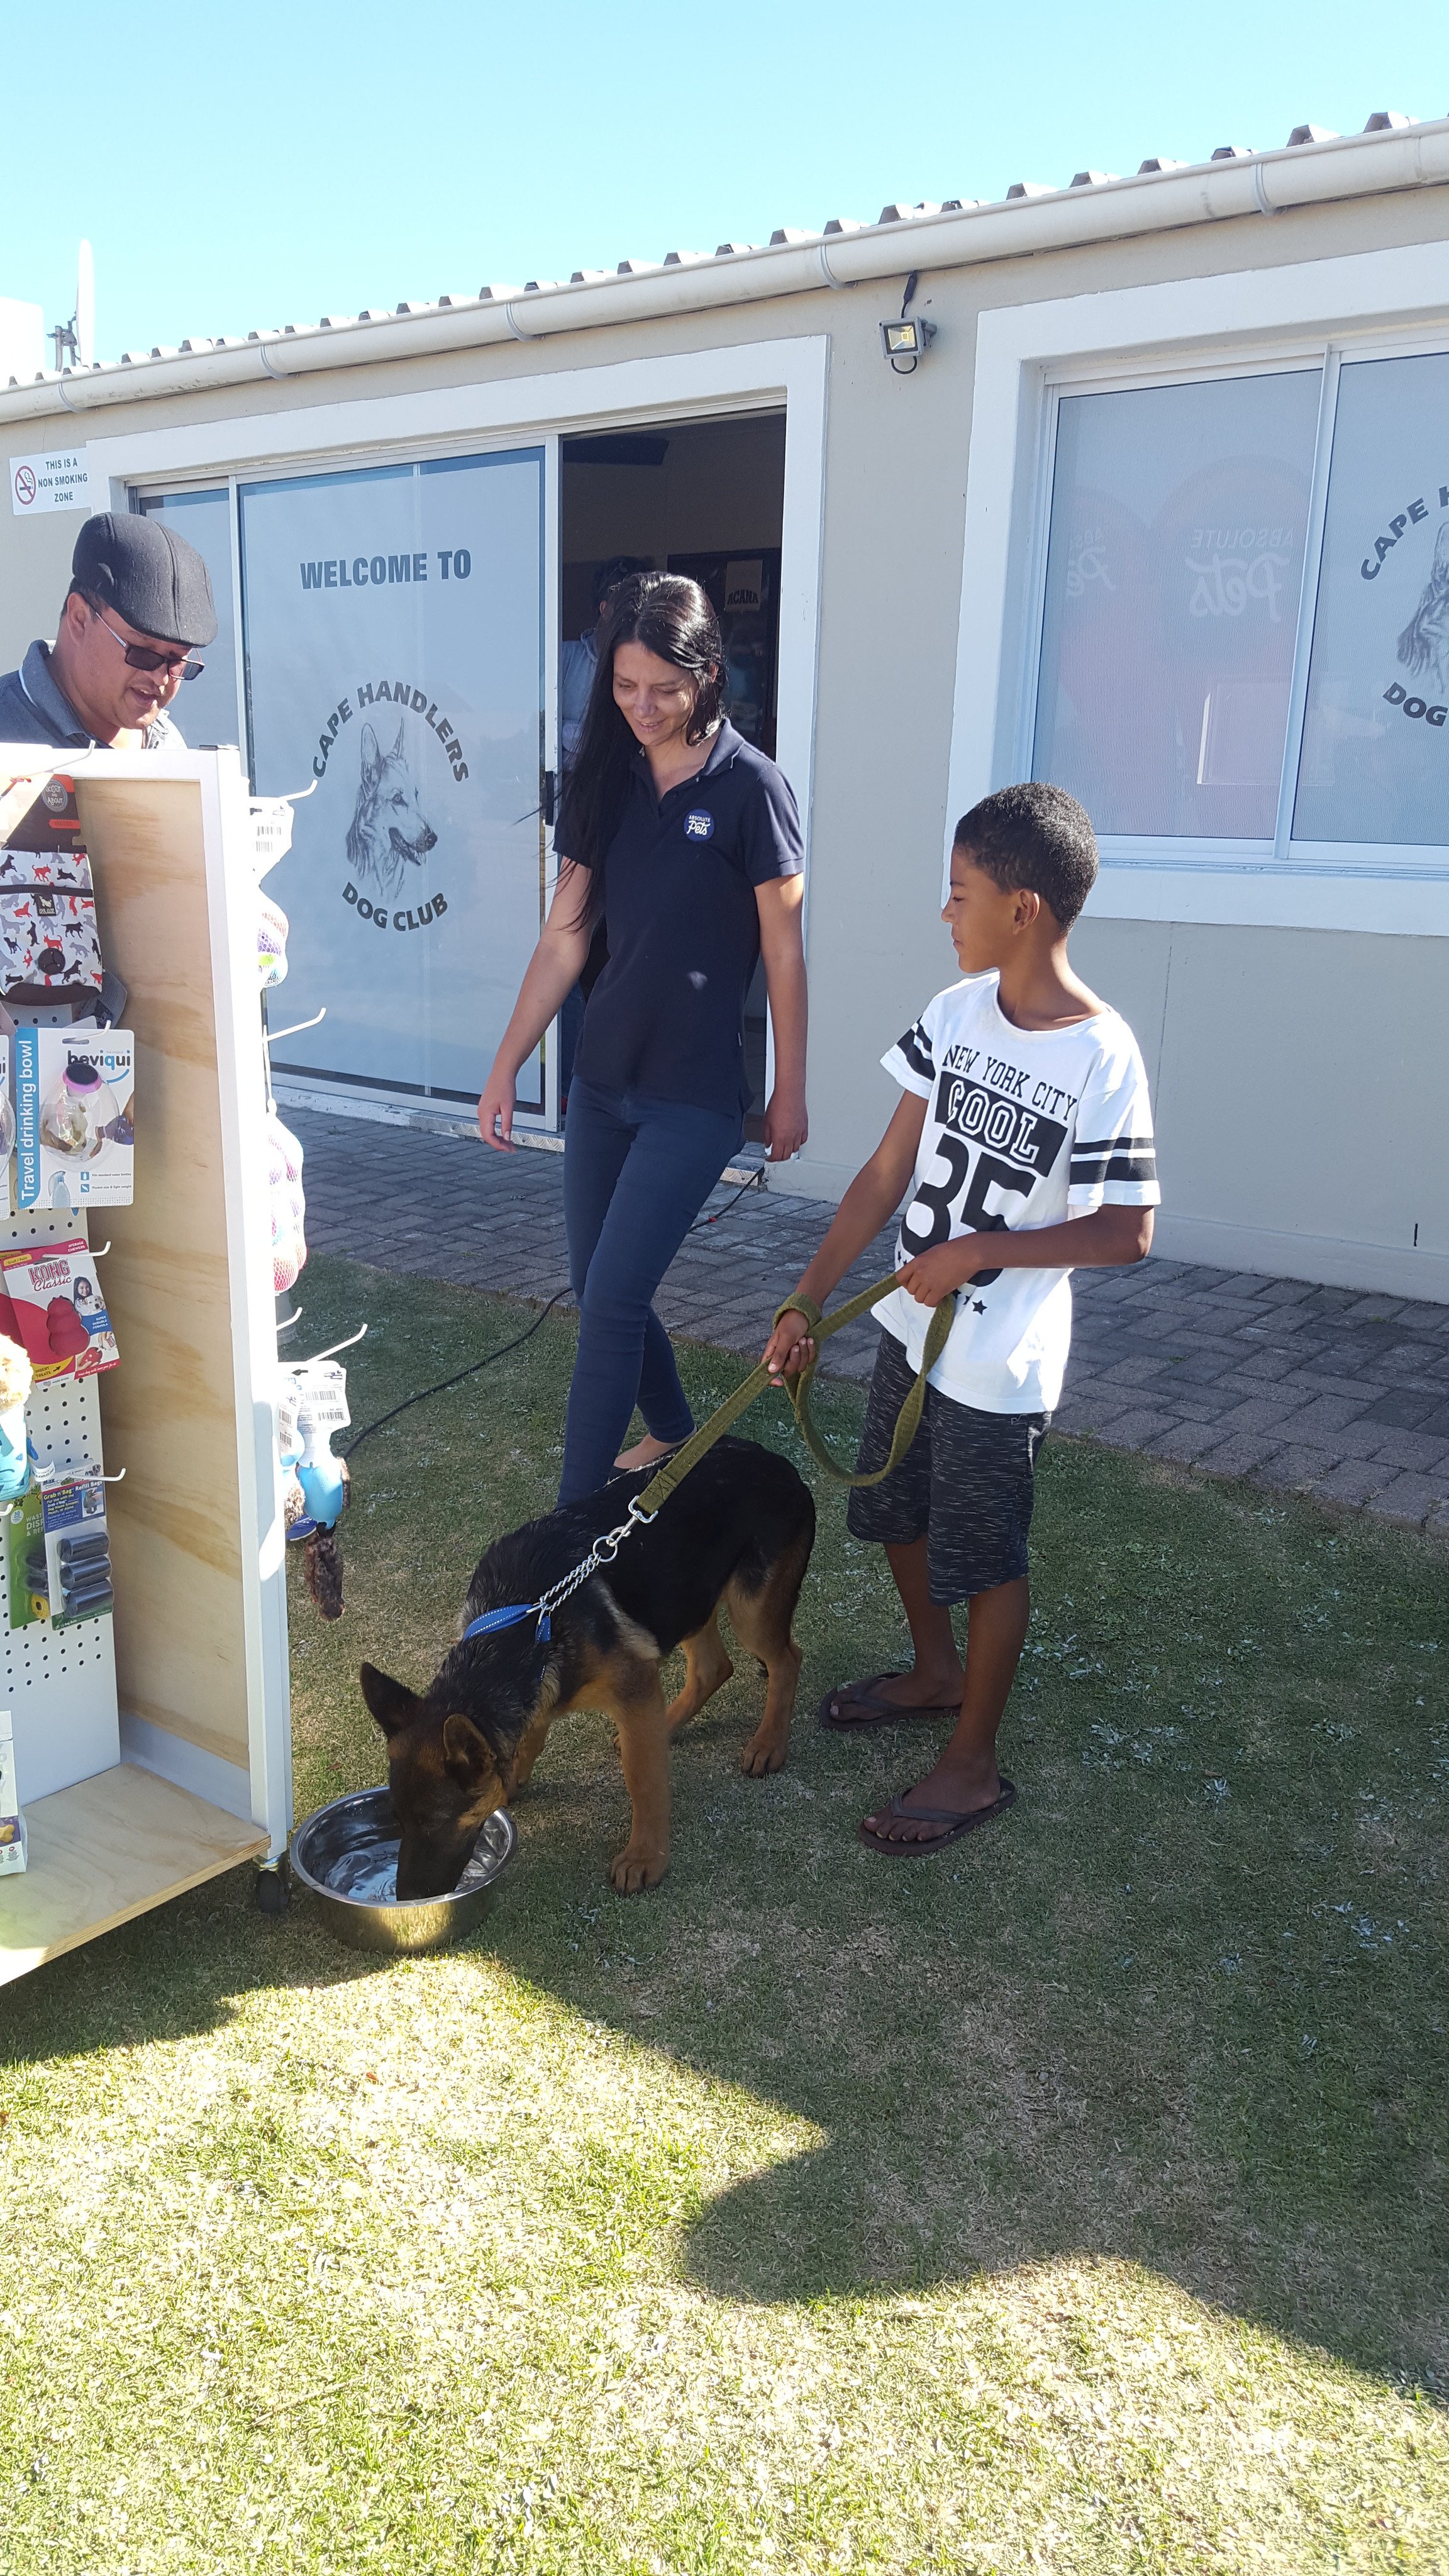 Customer and his dog at Cape Handlers Dog Club